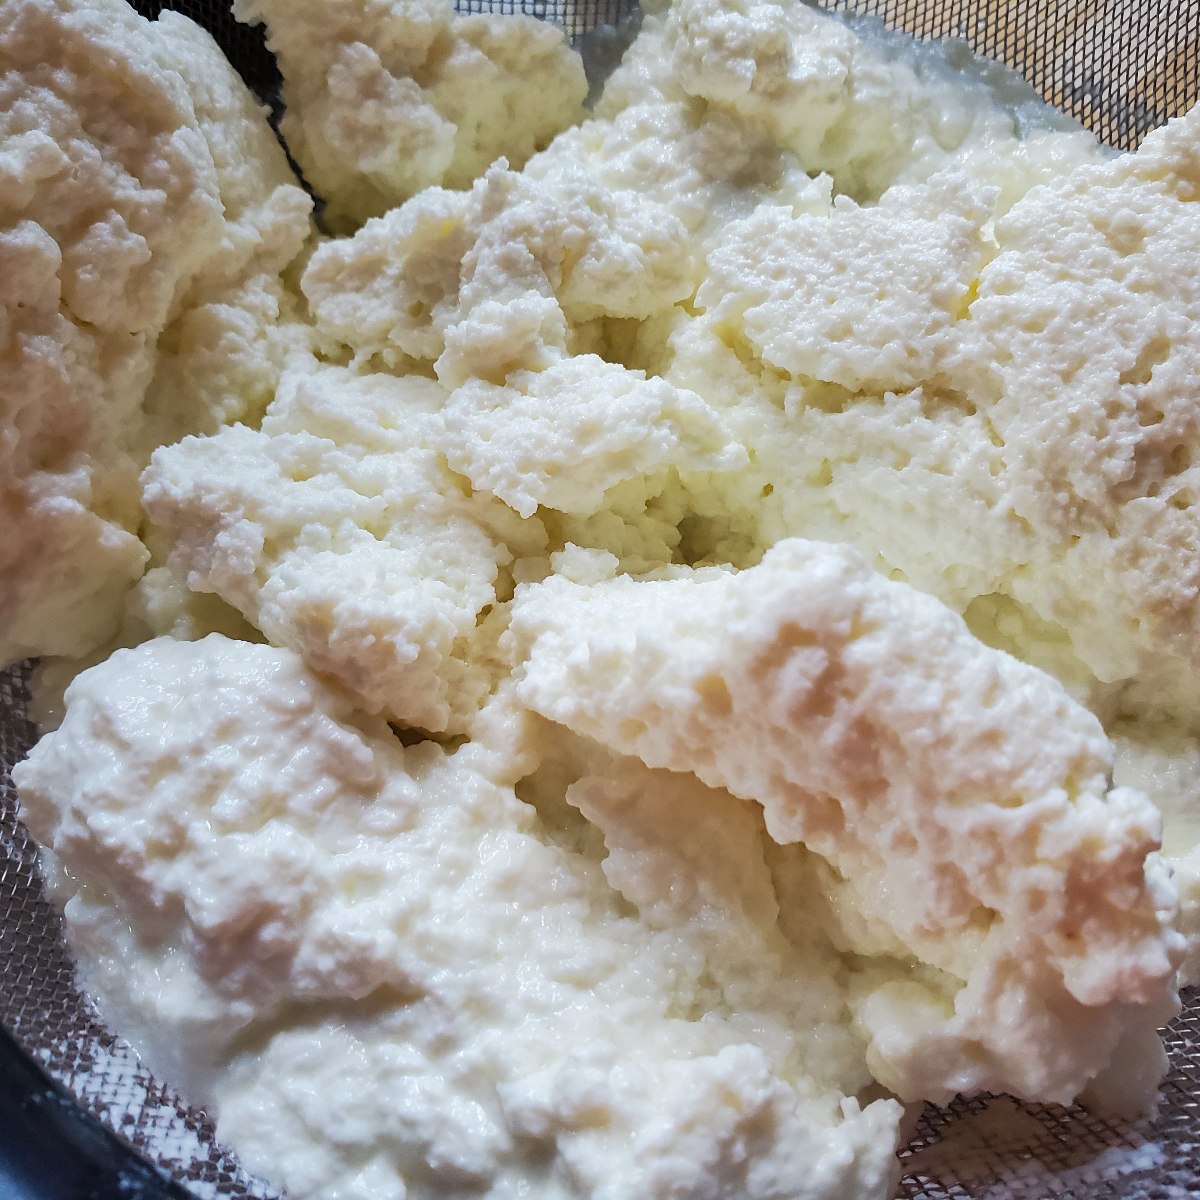 How to Make a Ricotta Cheese Recipe